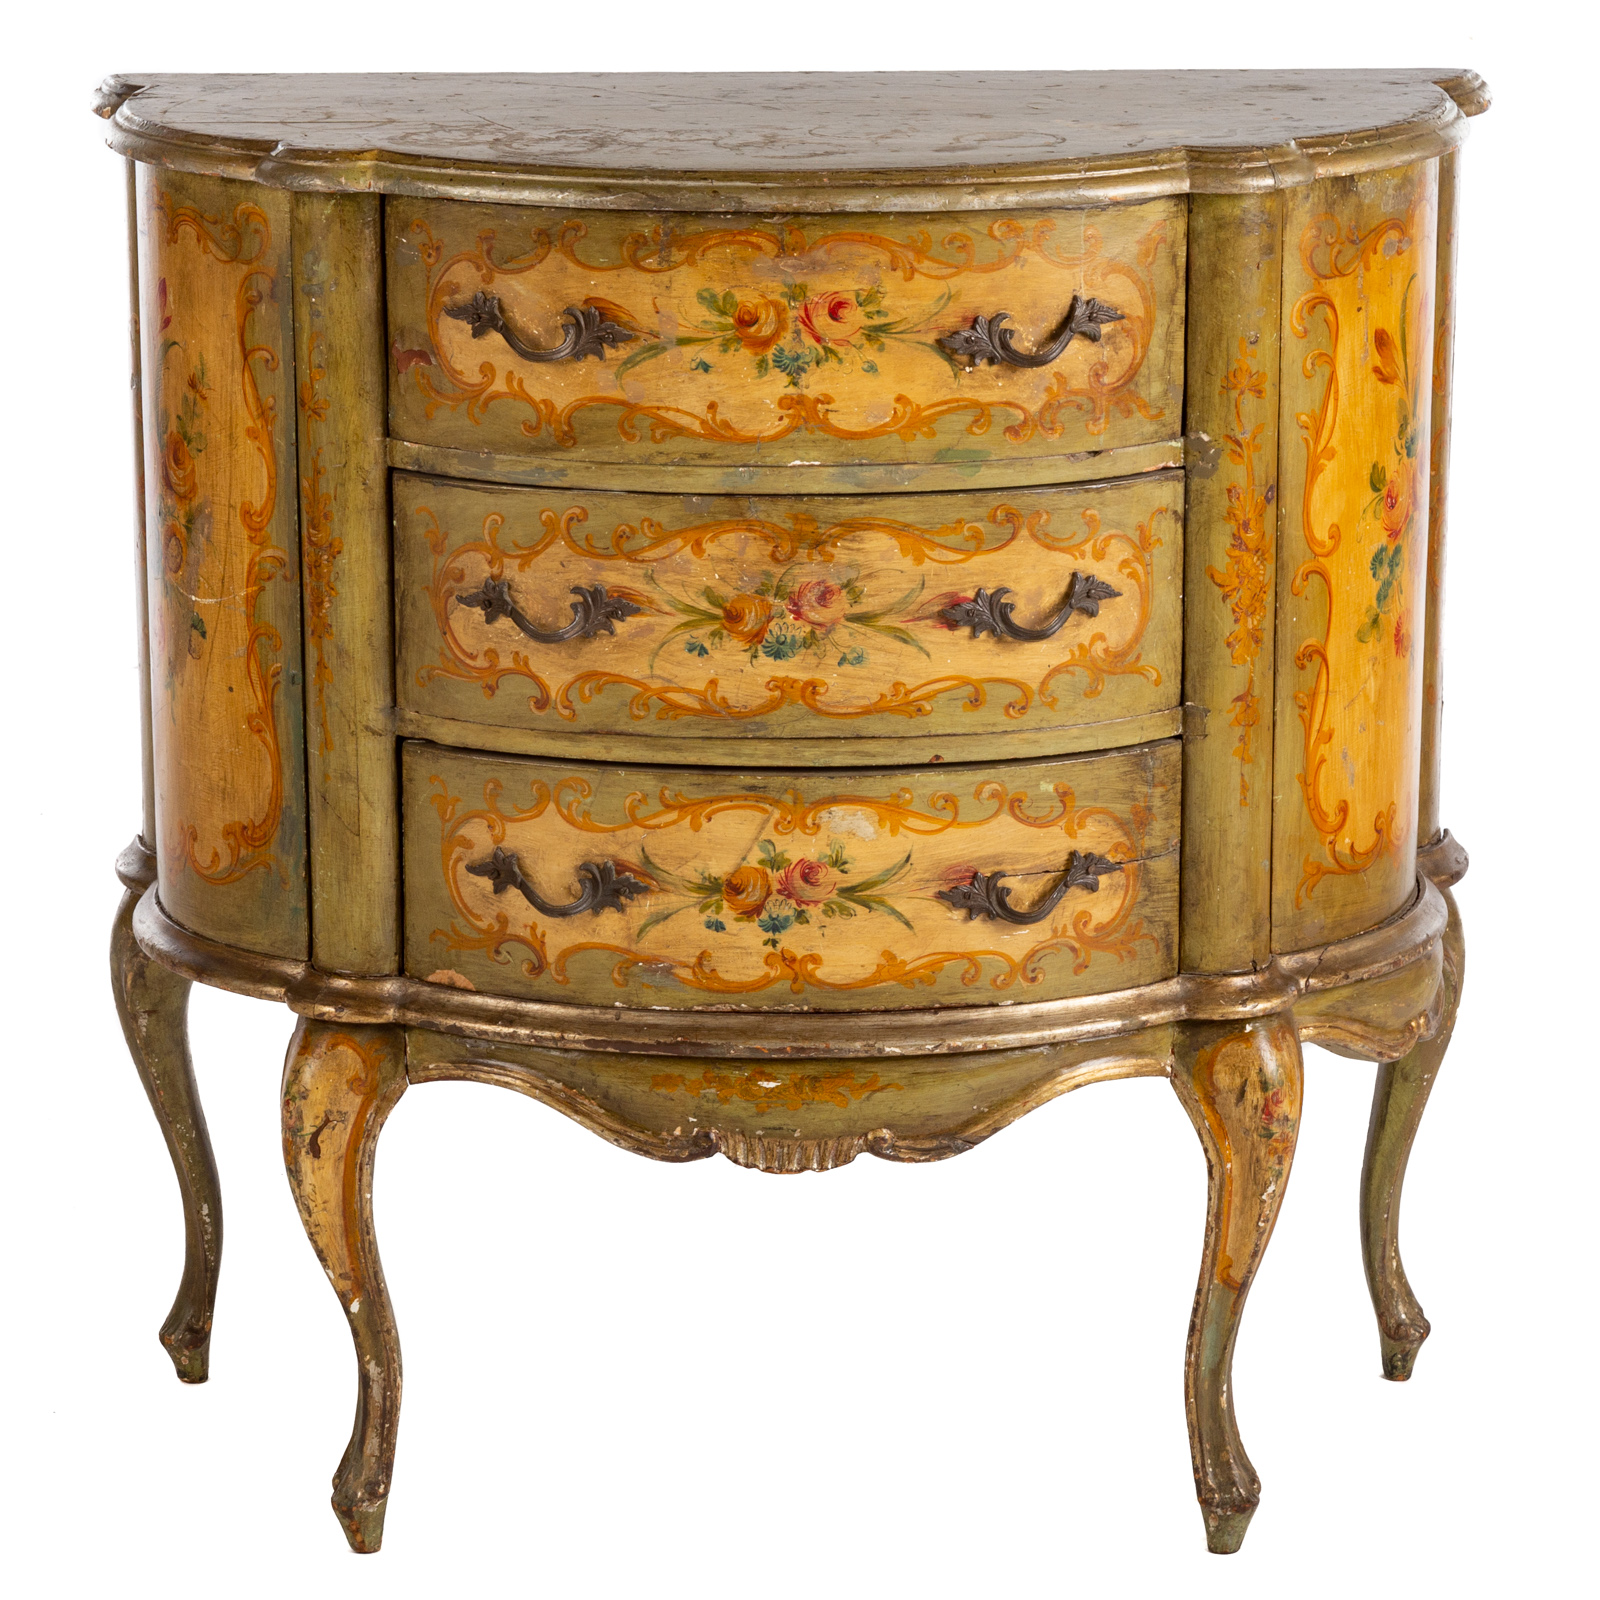 PAINTED WOOD DEMILUNE CONSOLE 20th 369825